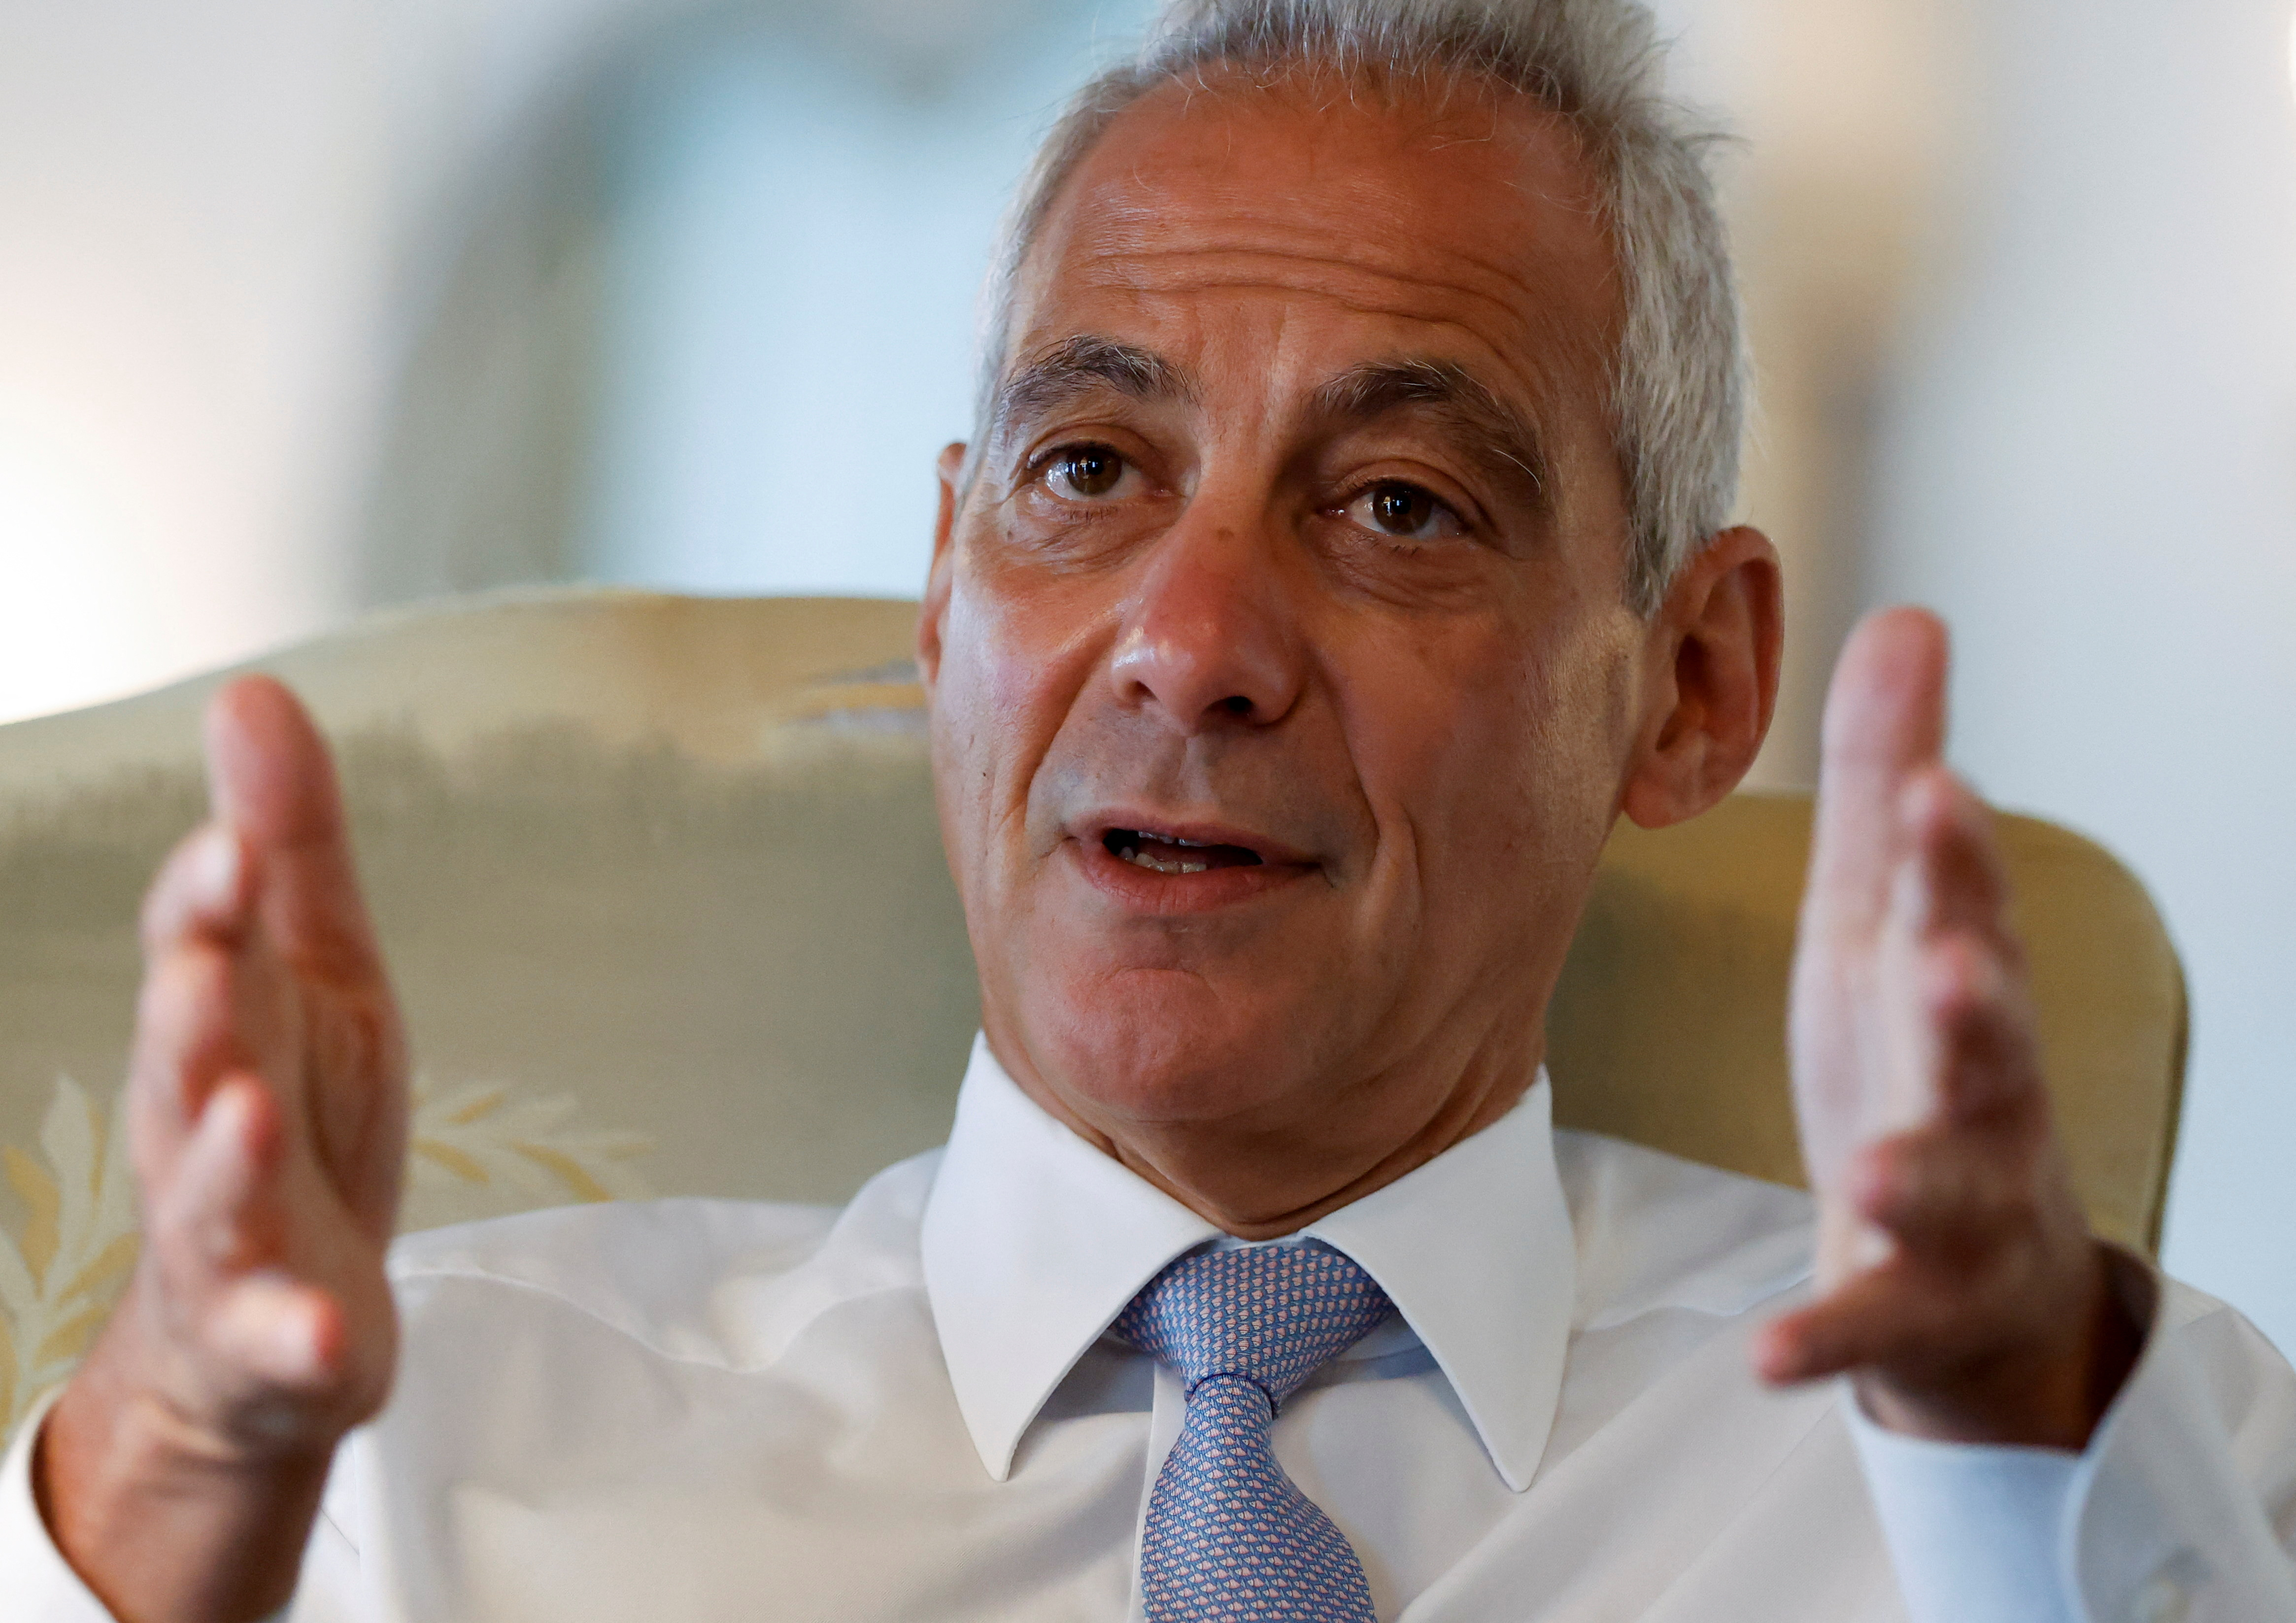 U.S. Ambassador to Japan Rahm Emanuel speaks during an interview with Reuters at the ambassador's residence in Tokyo, Japan August 1, 2022. REUTERS/Issei Kato